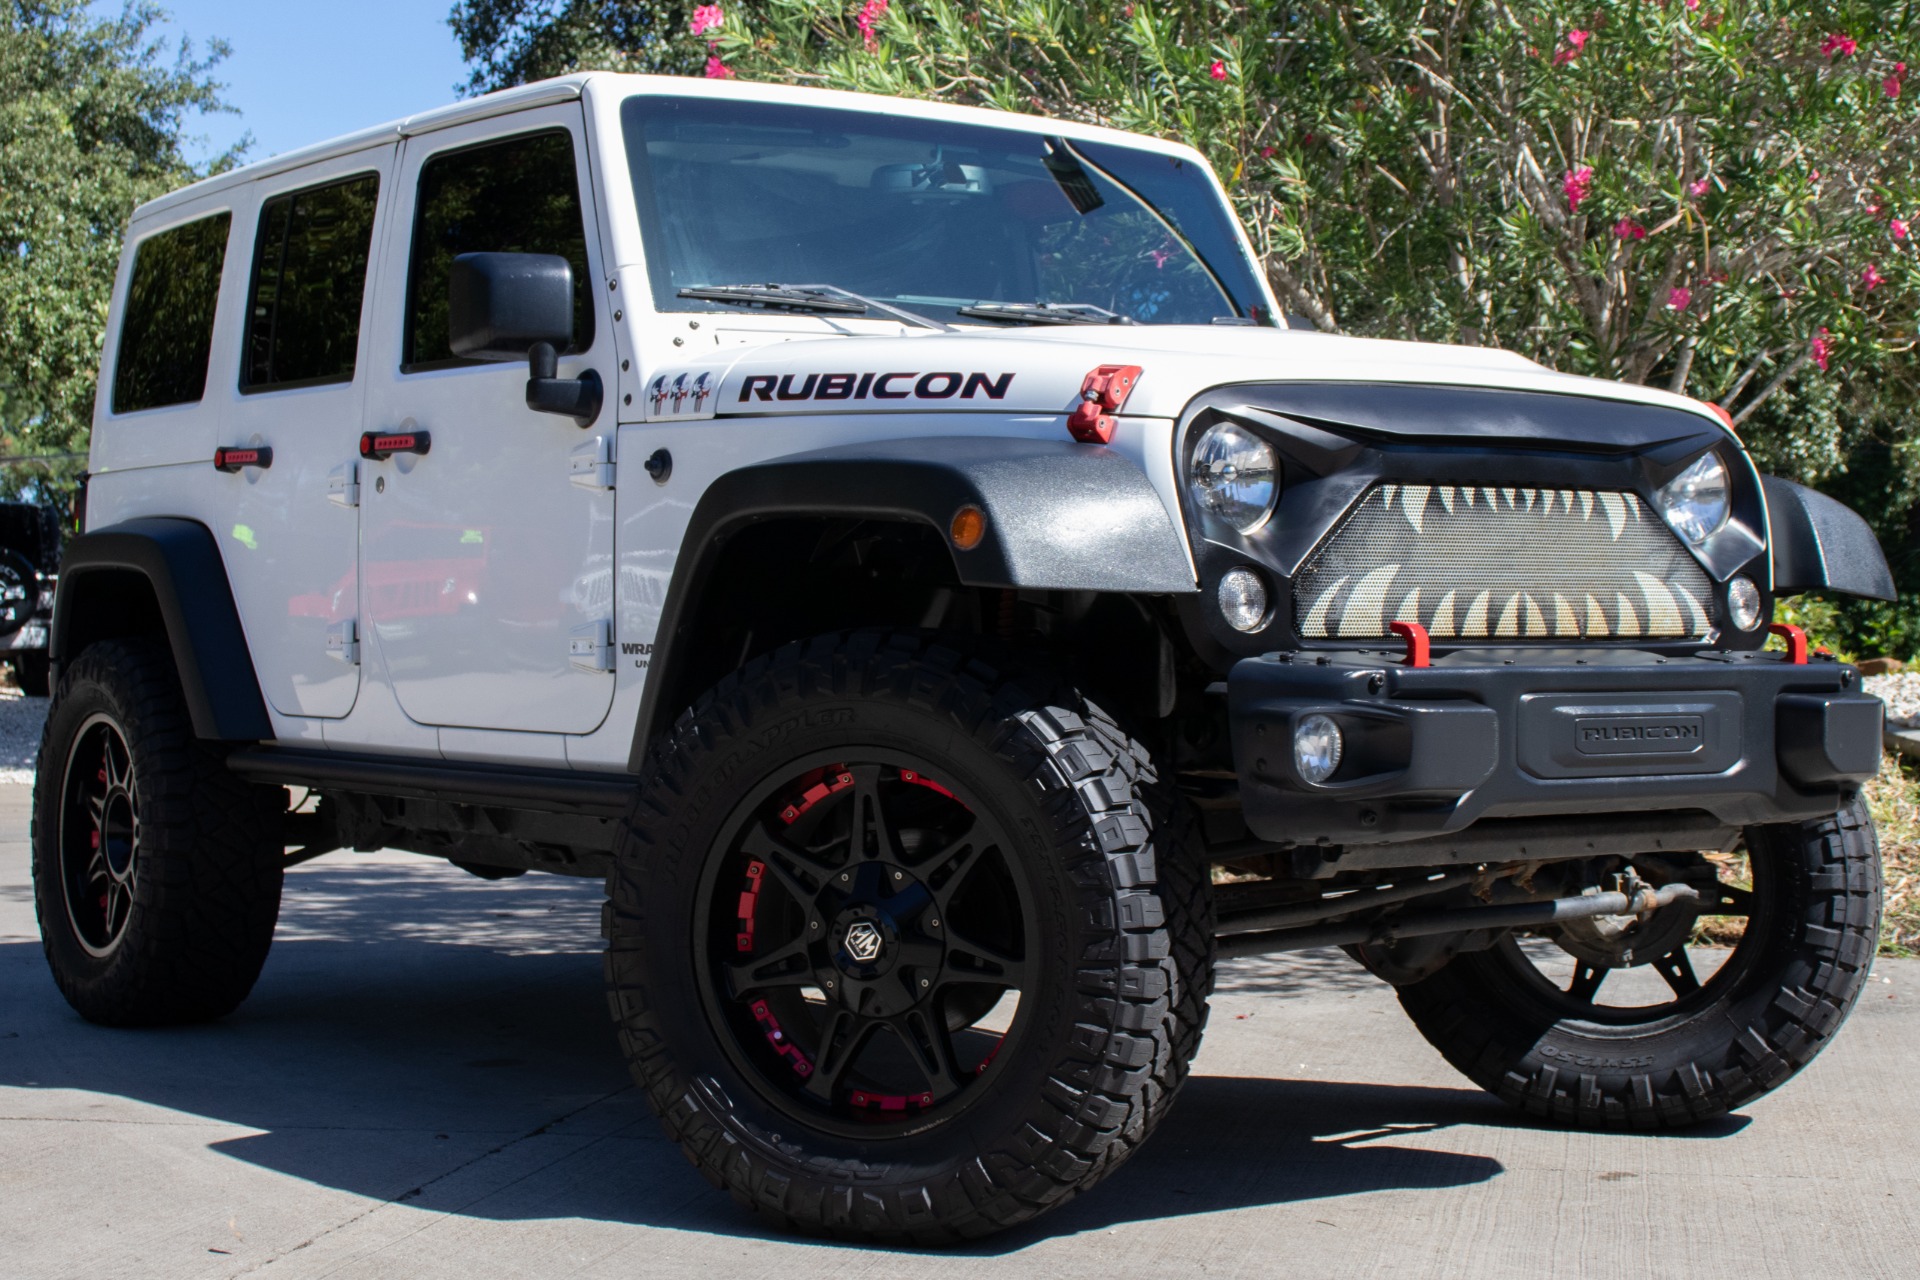 Used 2015 Jeep Wrangler Unlimited Rubicon Hard Rock For Sale ($34,995) |  Select Jeeps Inc. Stock #742482